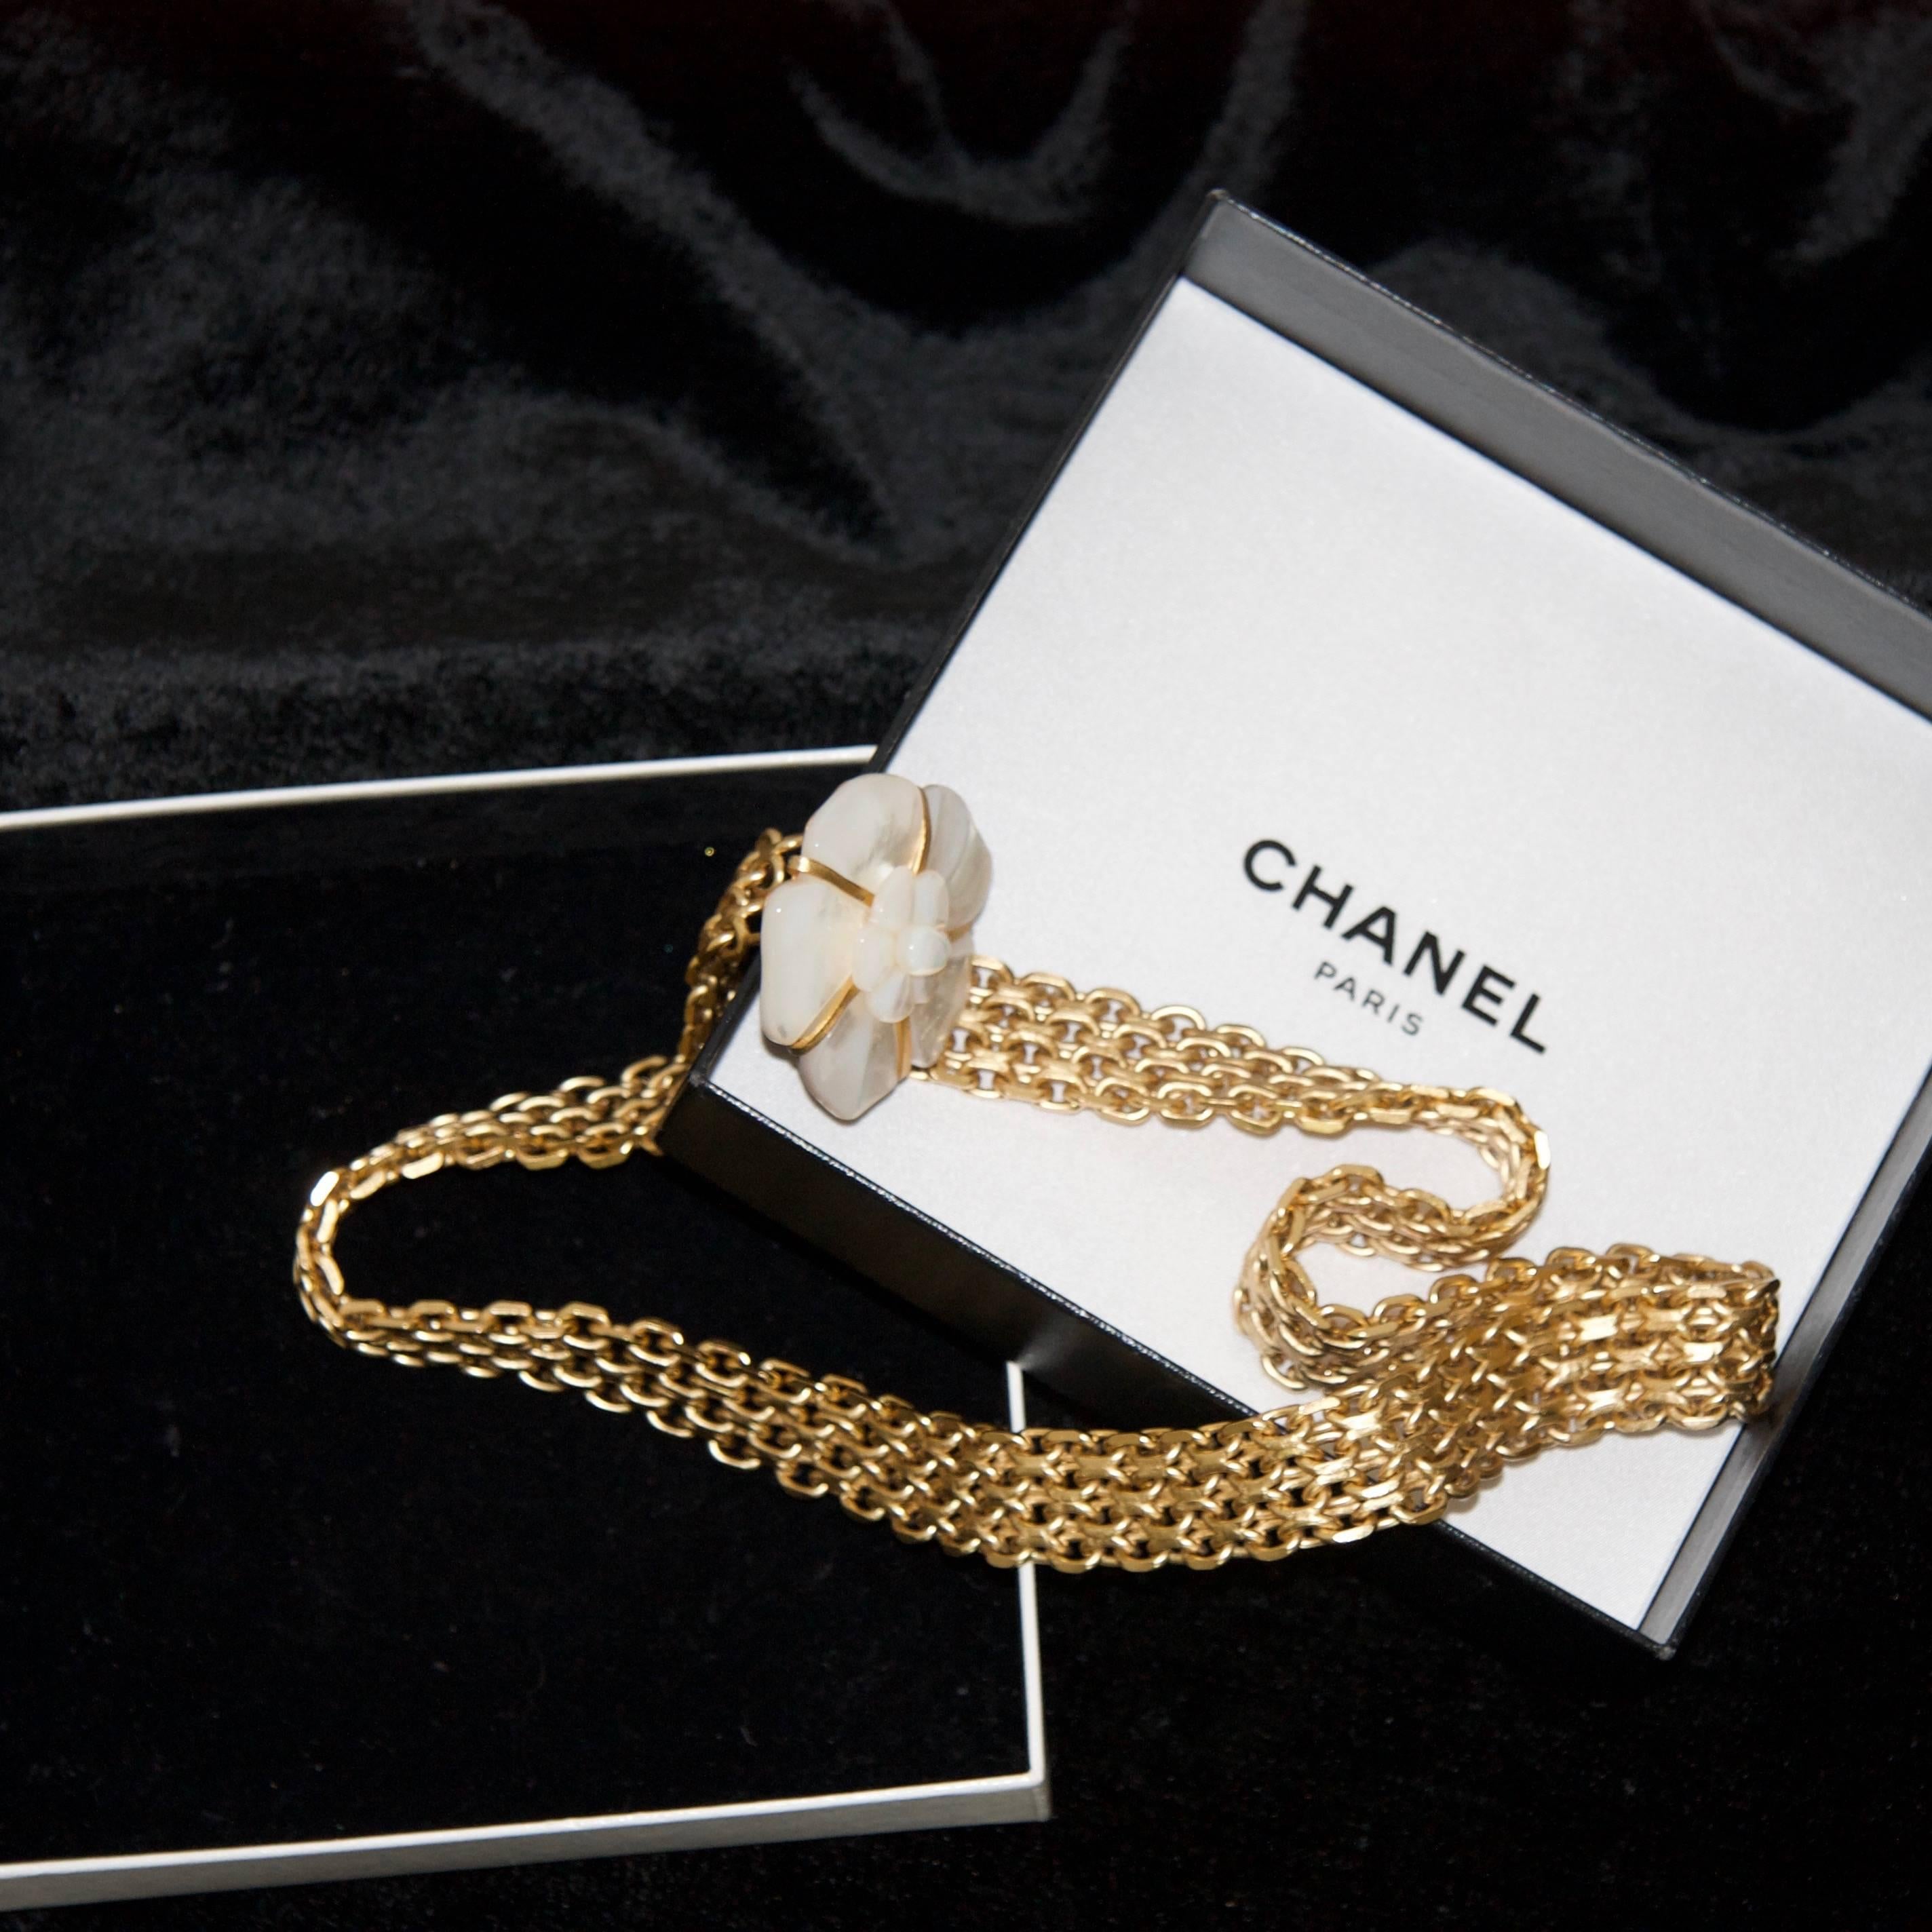 2001 Chanel gold plated camellia waist/hip belt.
Camellia flower made with mother of pearl mounted on a filigree plate.